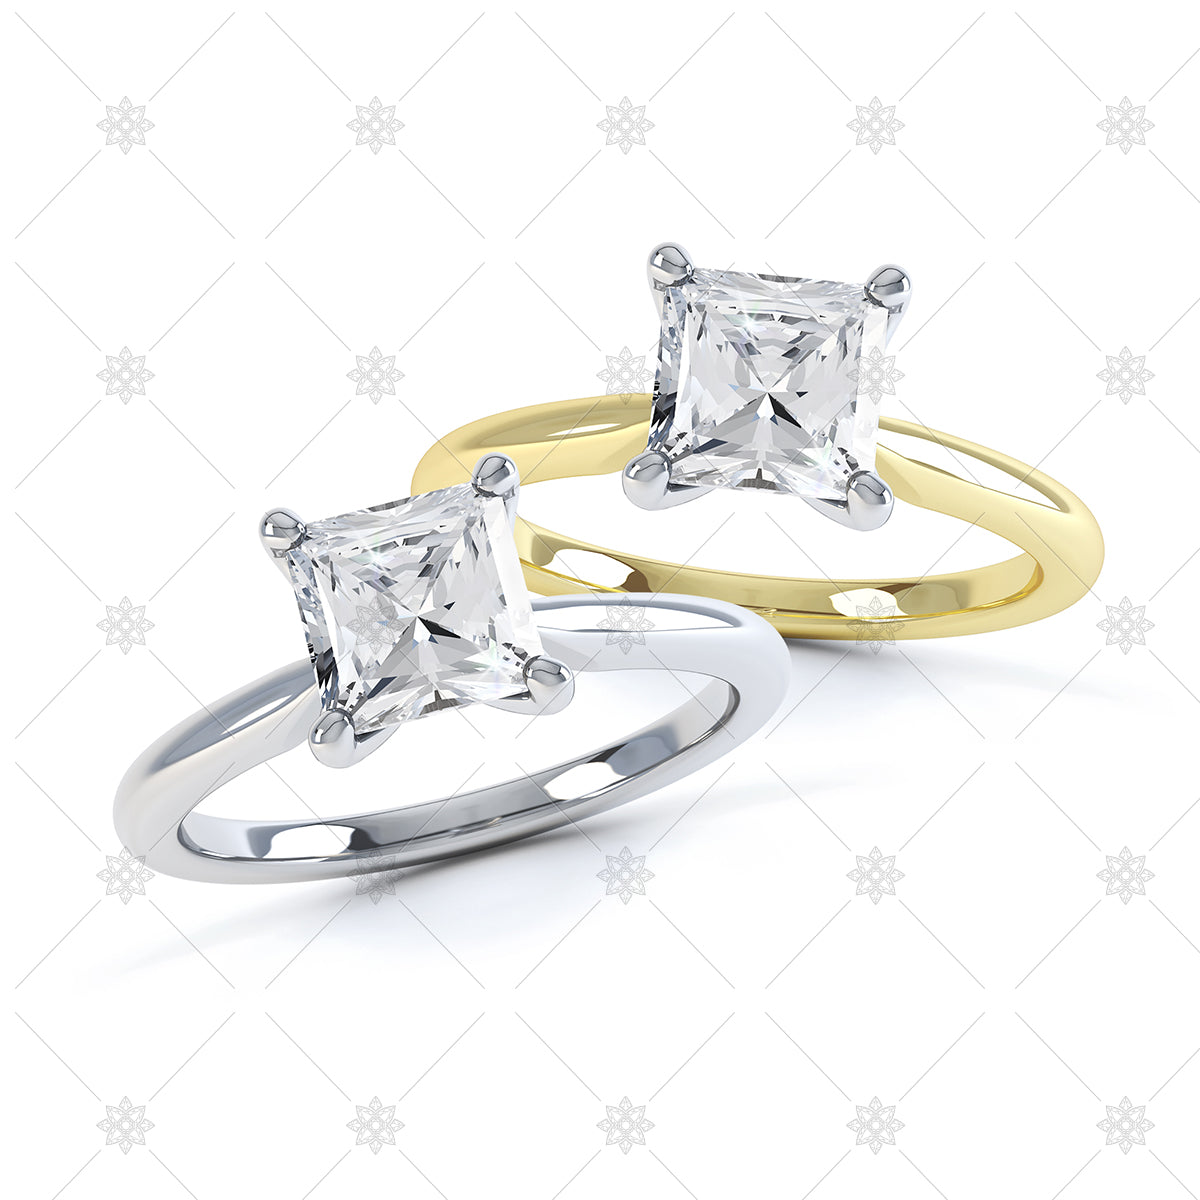 Square 4 Claw Ring Set - 3002